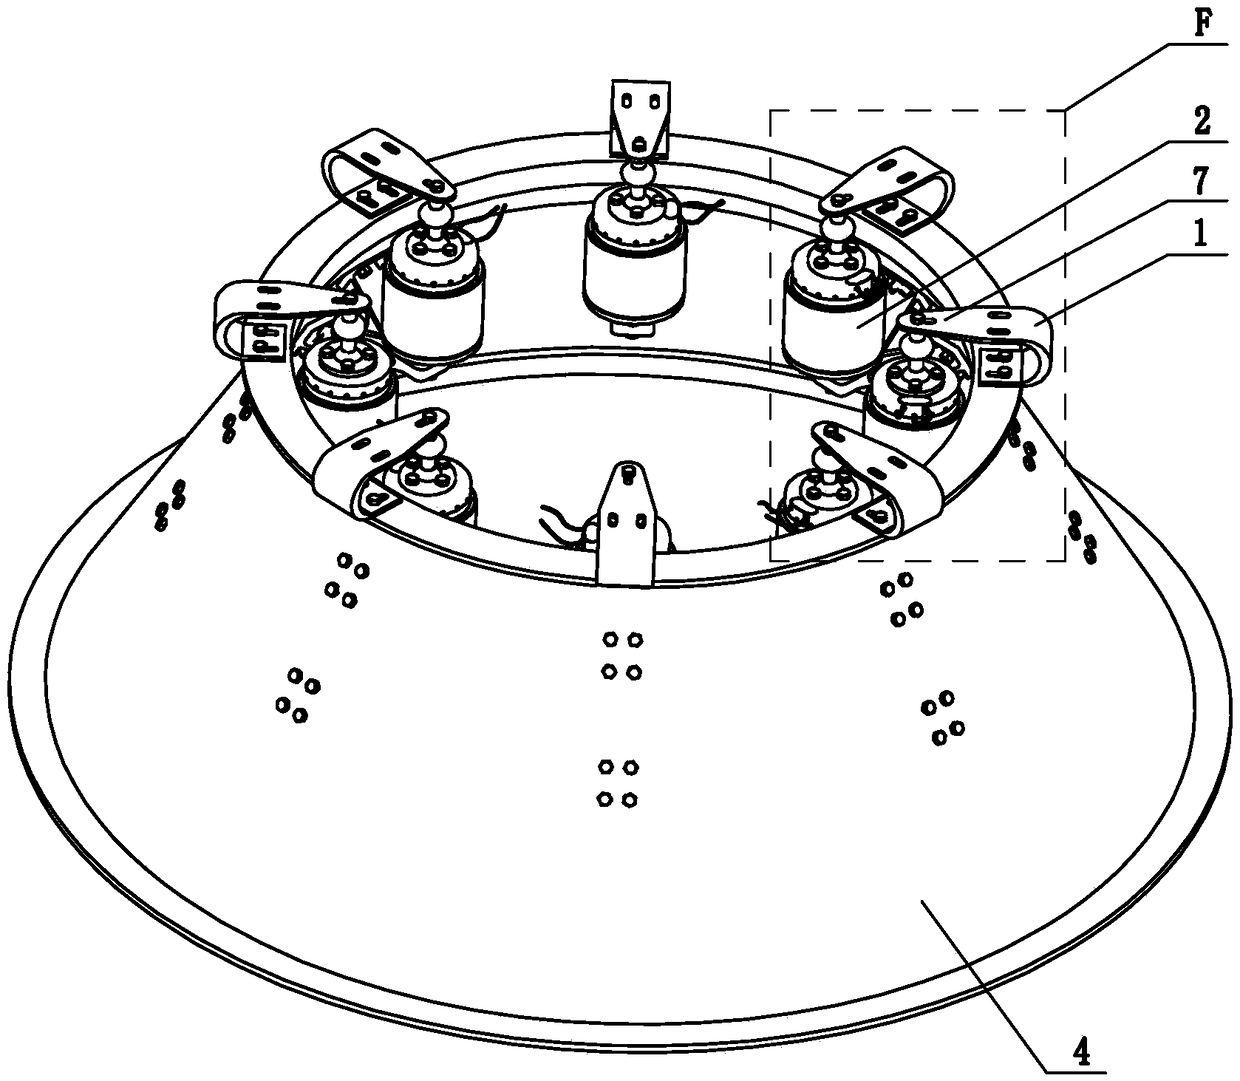 Active and passive integrated star vibration isolation device